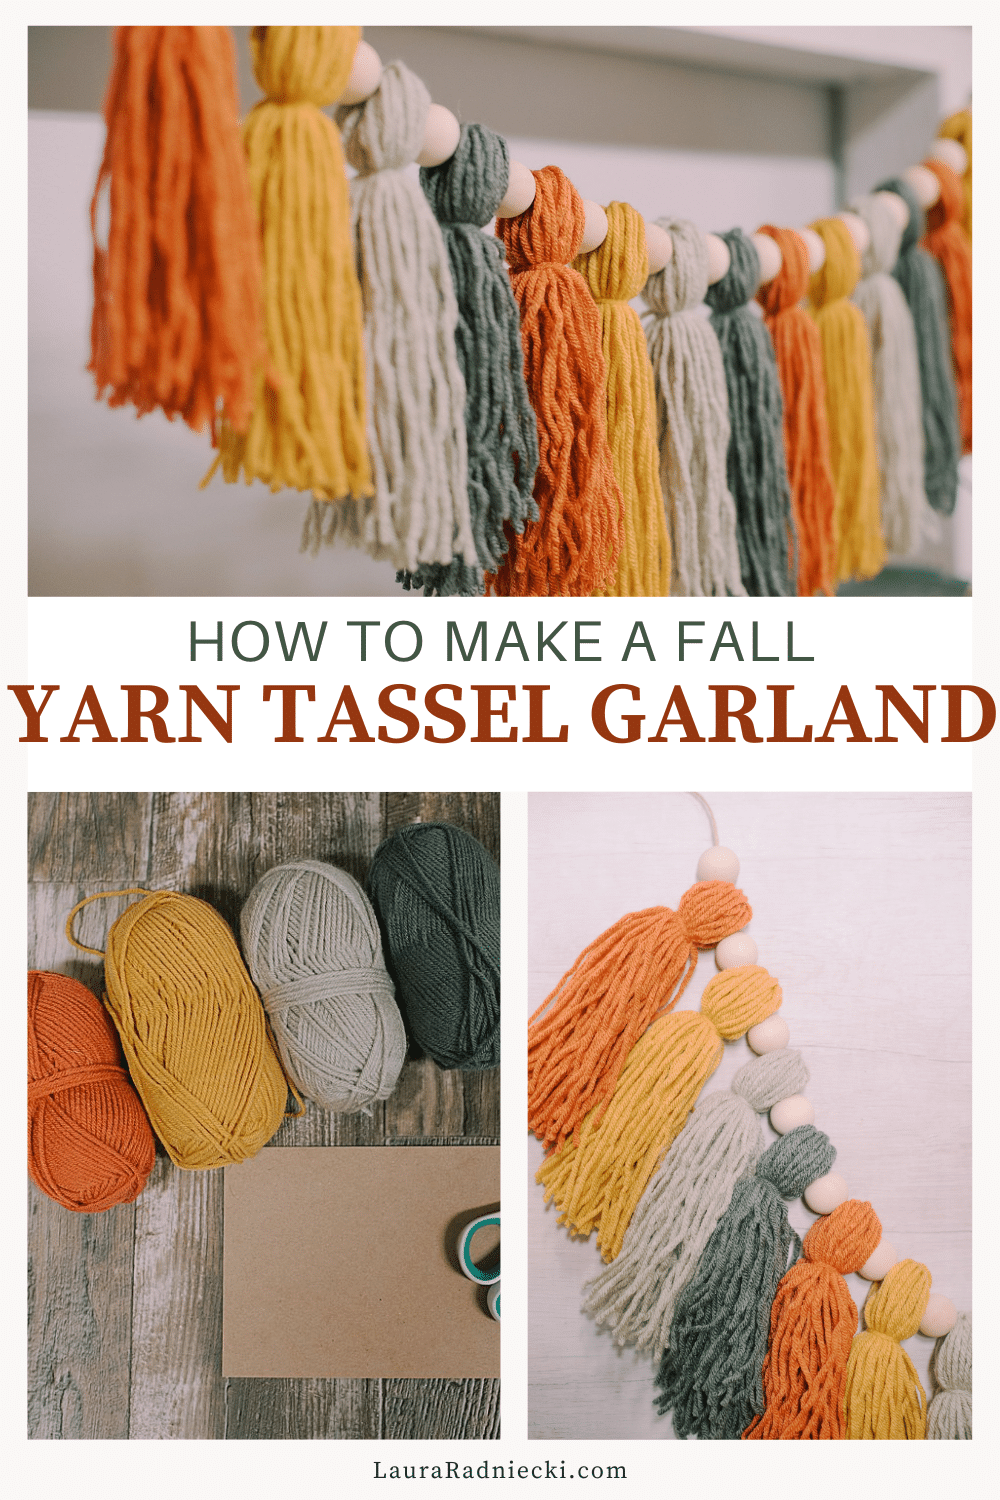 How to make a fall yarn tassel garland using yarn that is autumn hued in color.